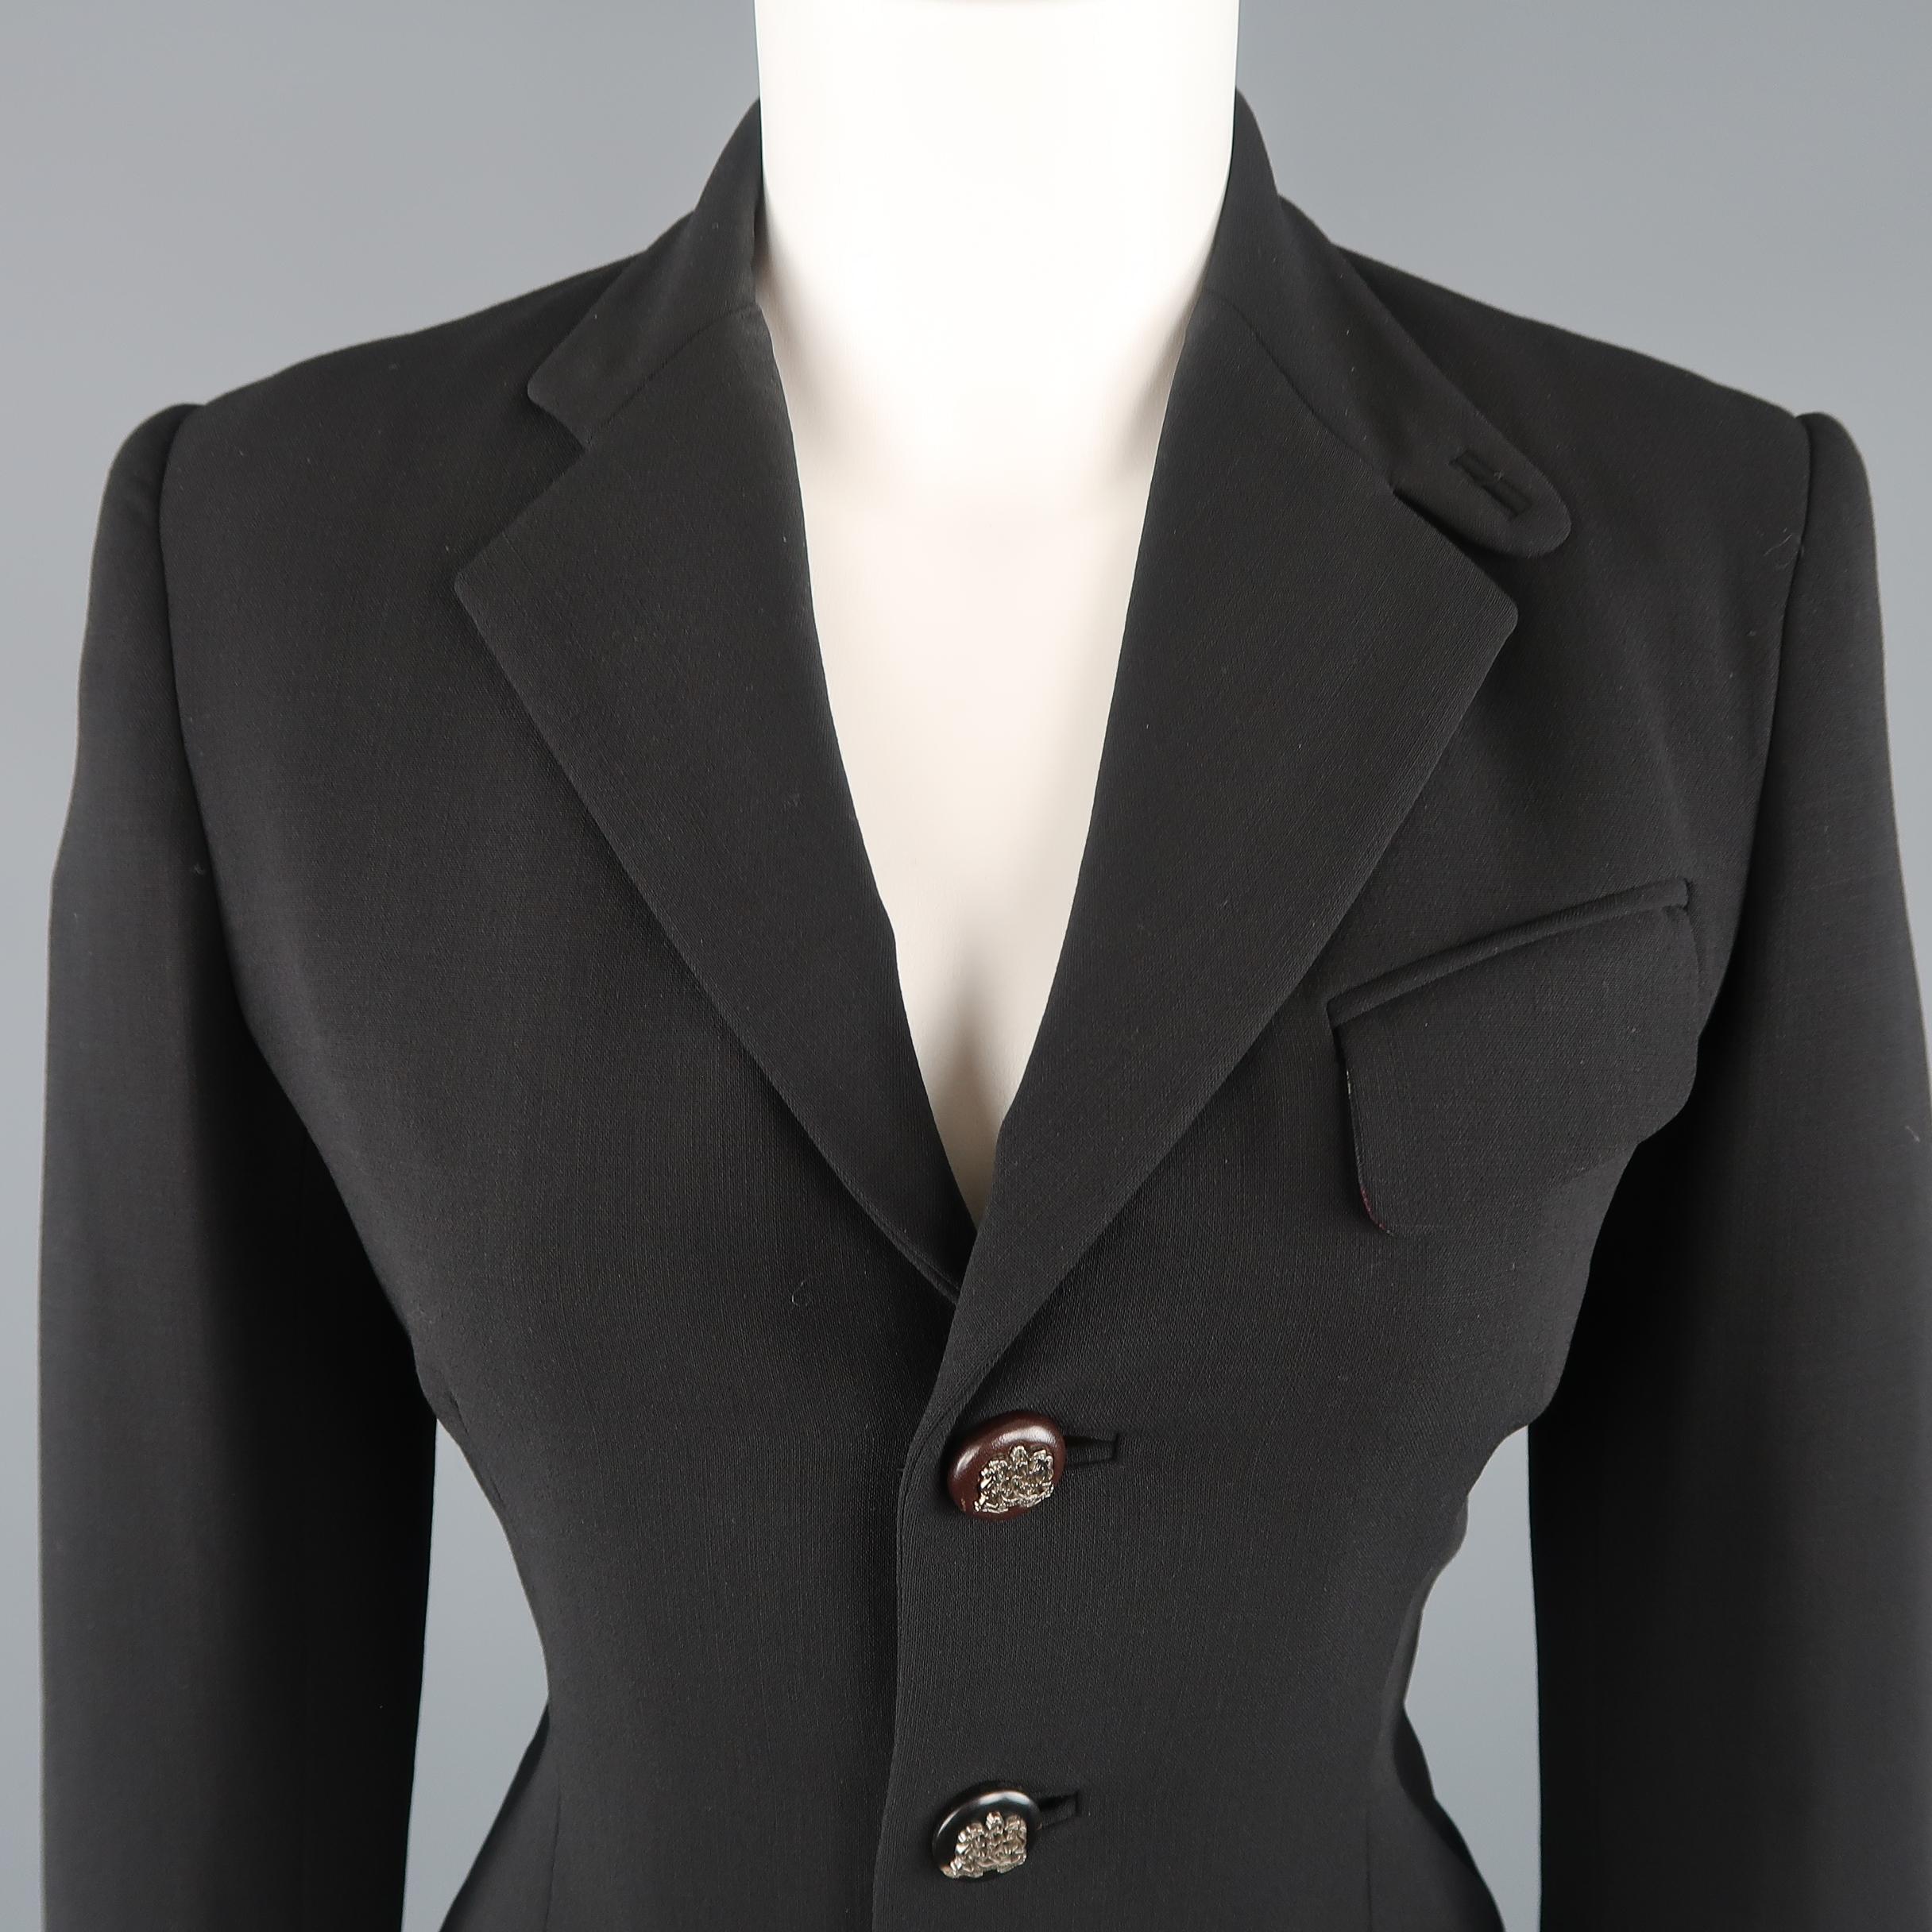 RALPH LAUREN BLACK LABEL equestrian style jacket comes in black stretch wool with a notch tab lapel, three button front with black and brown detailed buttons, slanted tab pockets, and plaid horse printed twill liner.
 
Excellent Pre-Owned